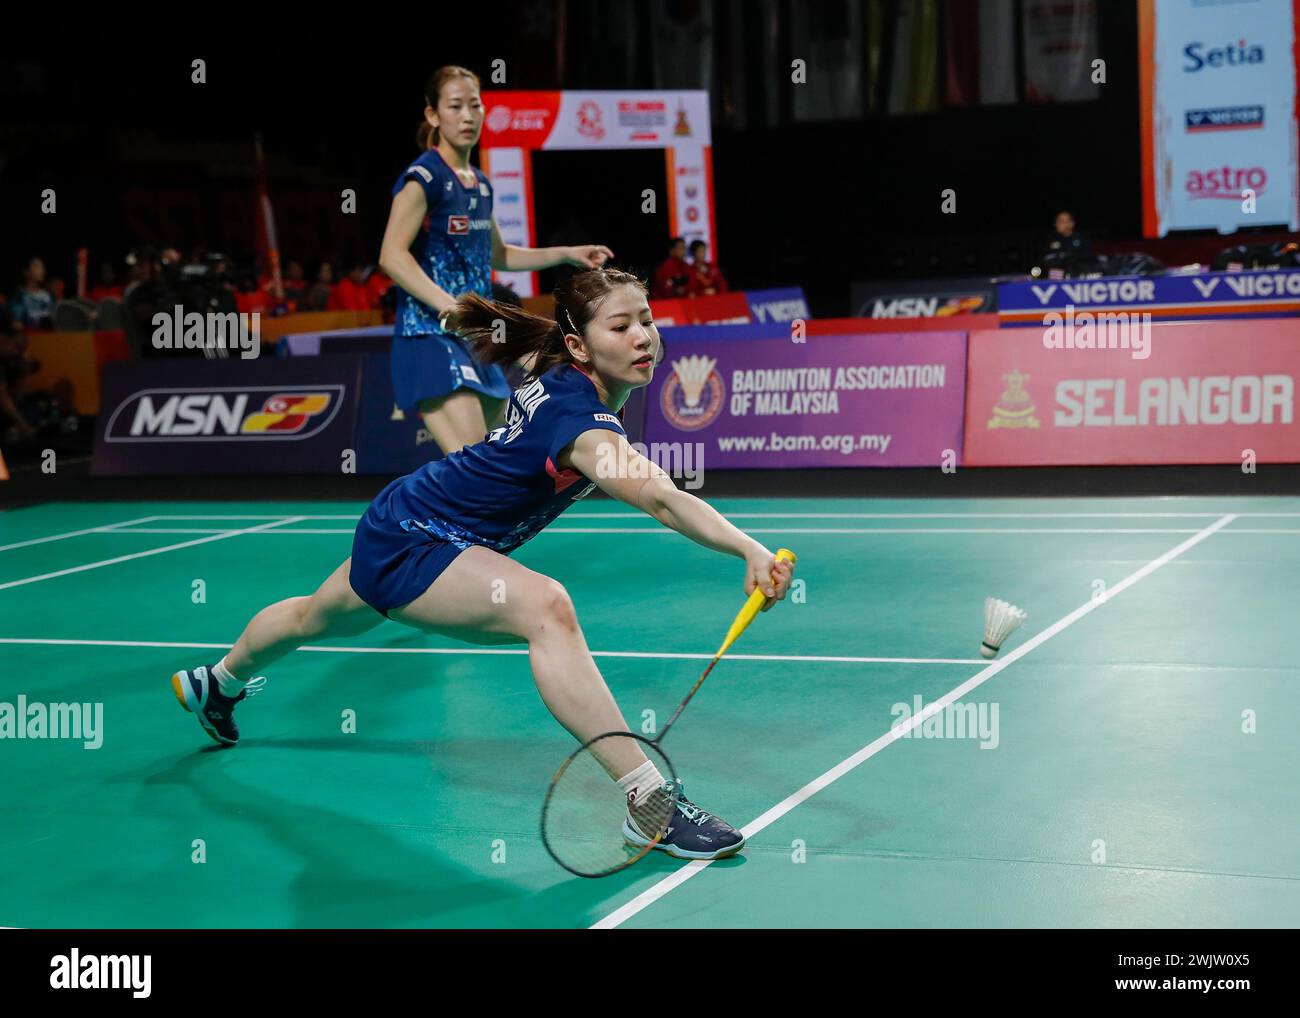 Shah Alam, Malaysia. 17th Feb, 2024. Matsuyama Nami/Shida Chiharu(front) of Japan compete in the doubles match against Treesa Jolly/Gayatri Gopichand Pullela of India during the women's team semifinal between Japan and India at the Badminton Asia Team Championships 2024 in Shah Alam, Selangor, Malaysia, Feb. 17, 2024. Credit: FL Wong/Xinhua/Alamy Live News Stock Photo